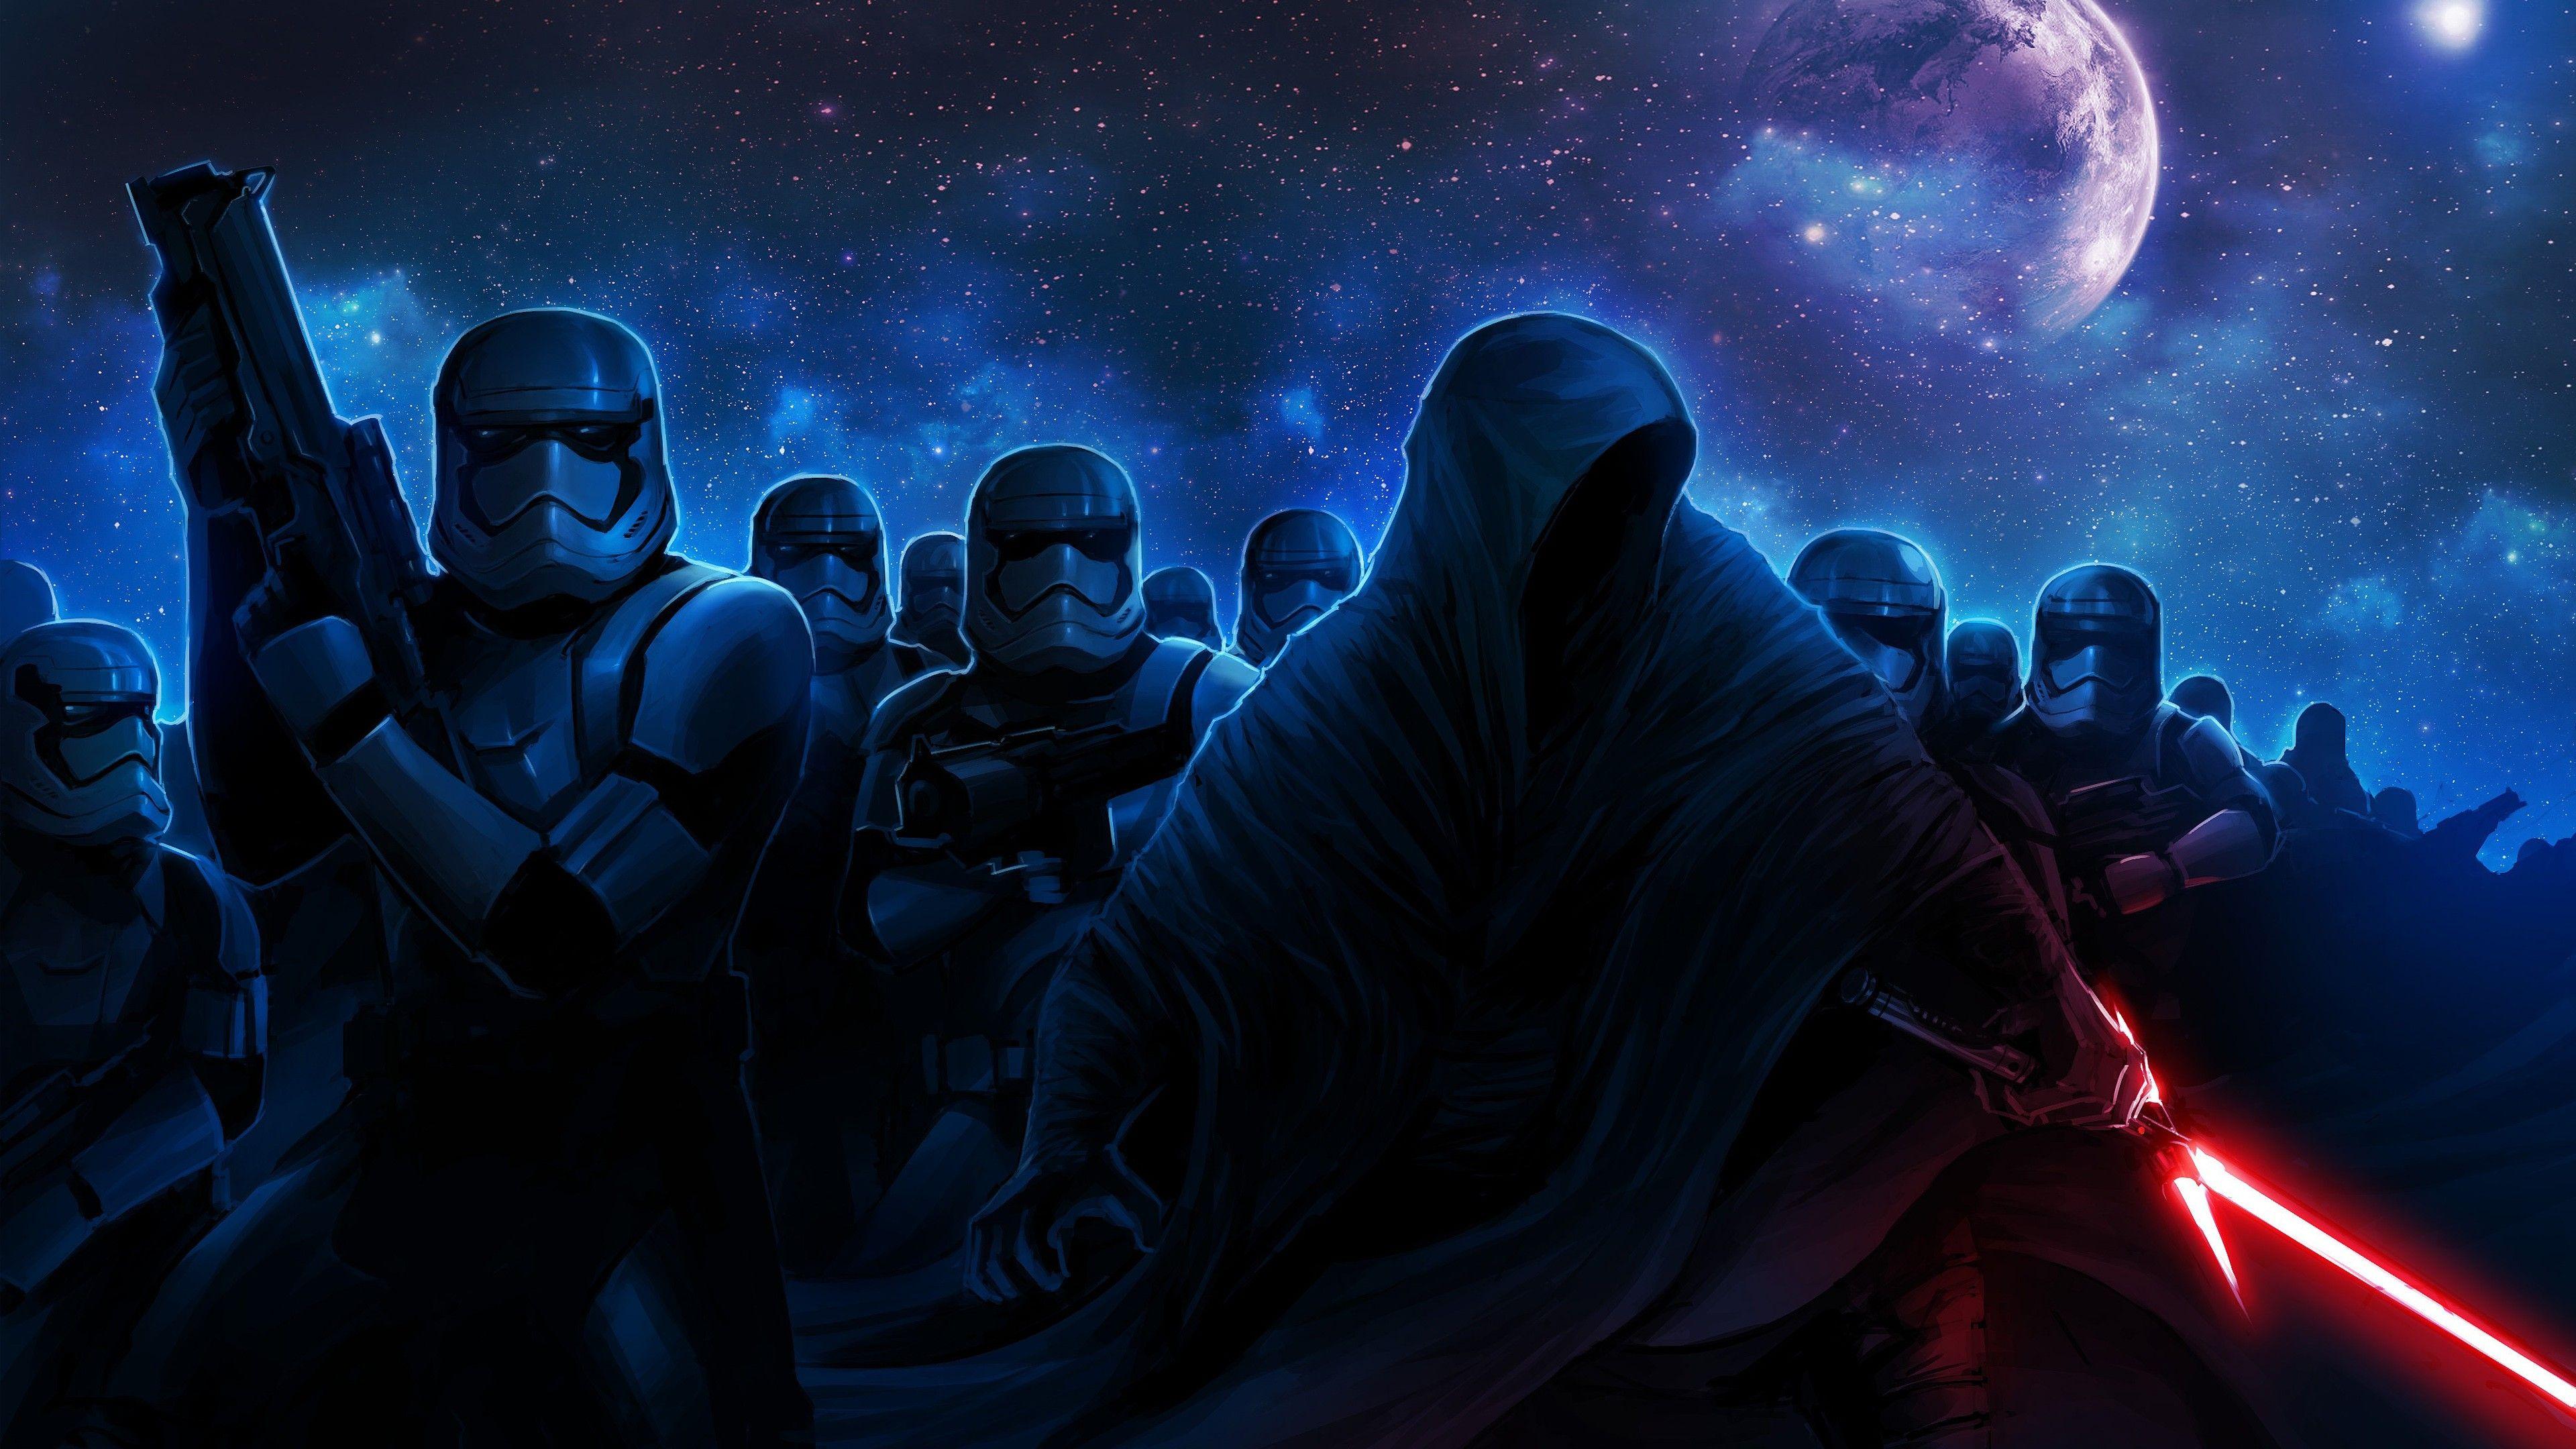 star wars animated iwatch wallpaper